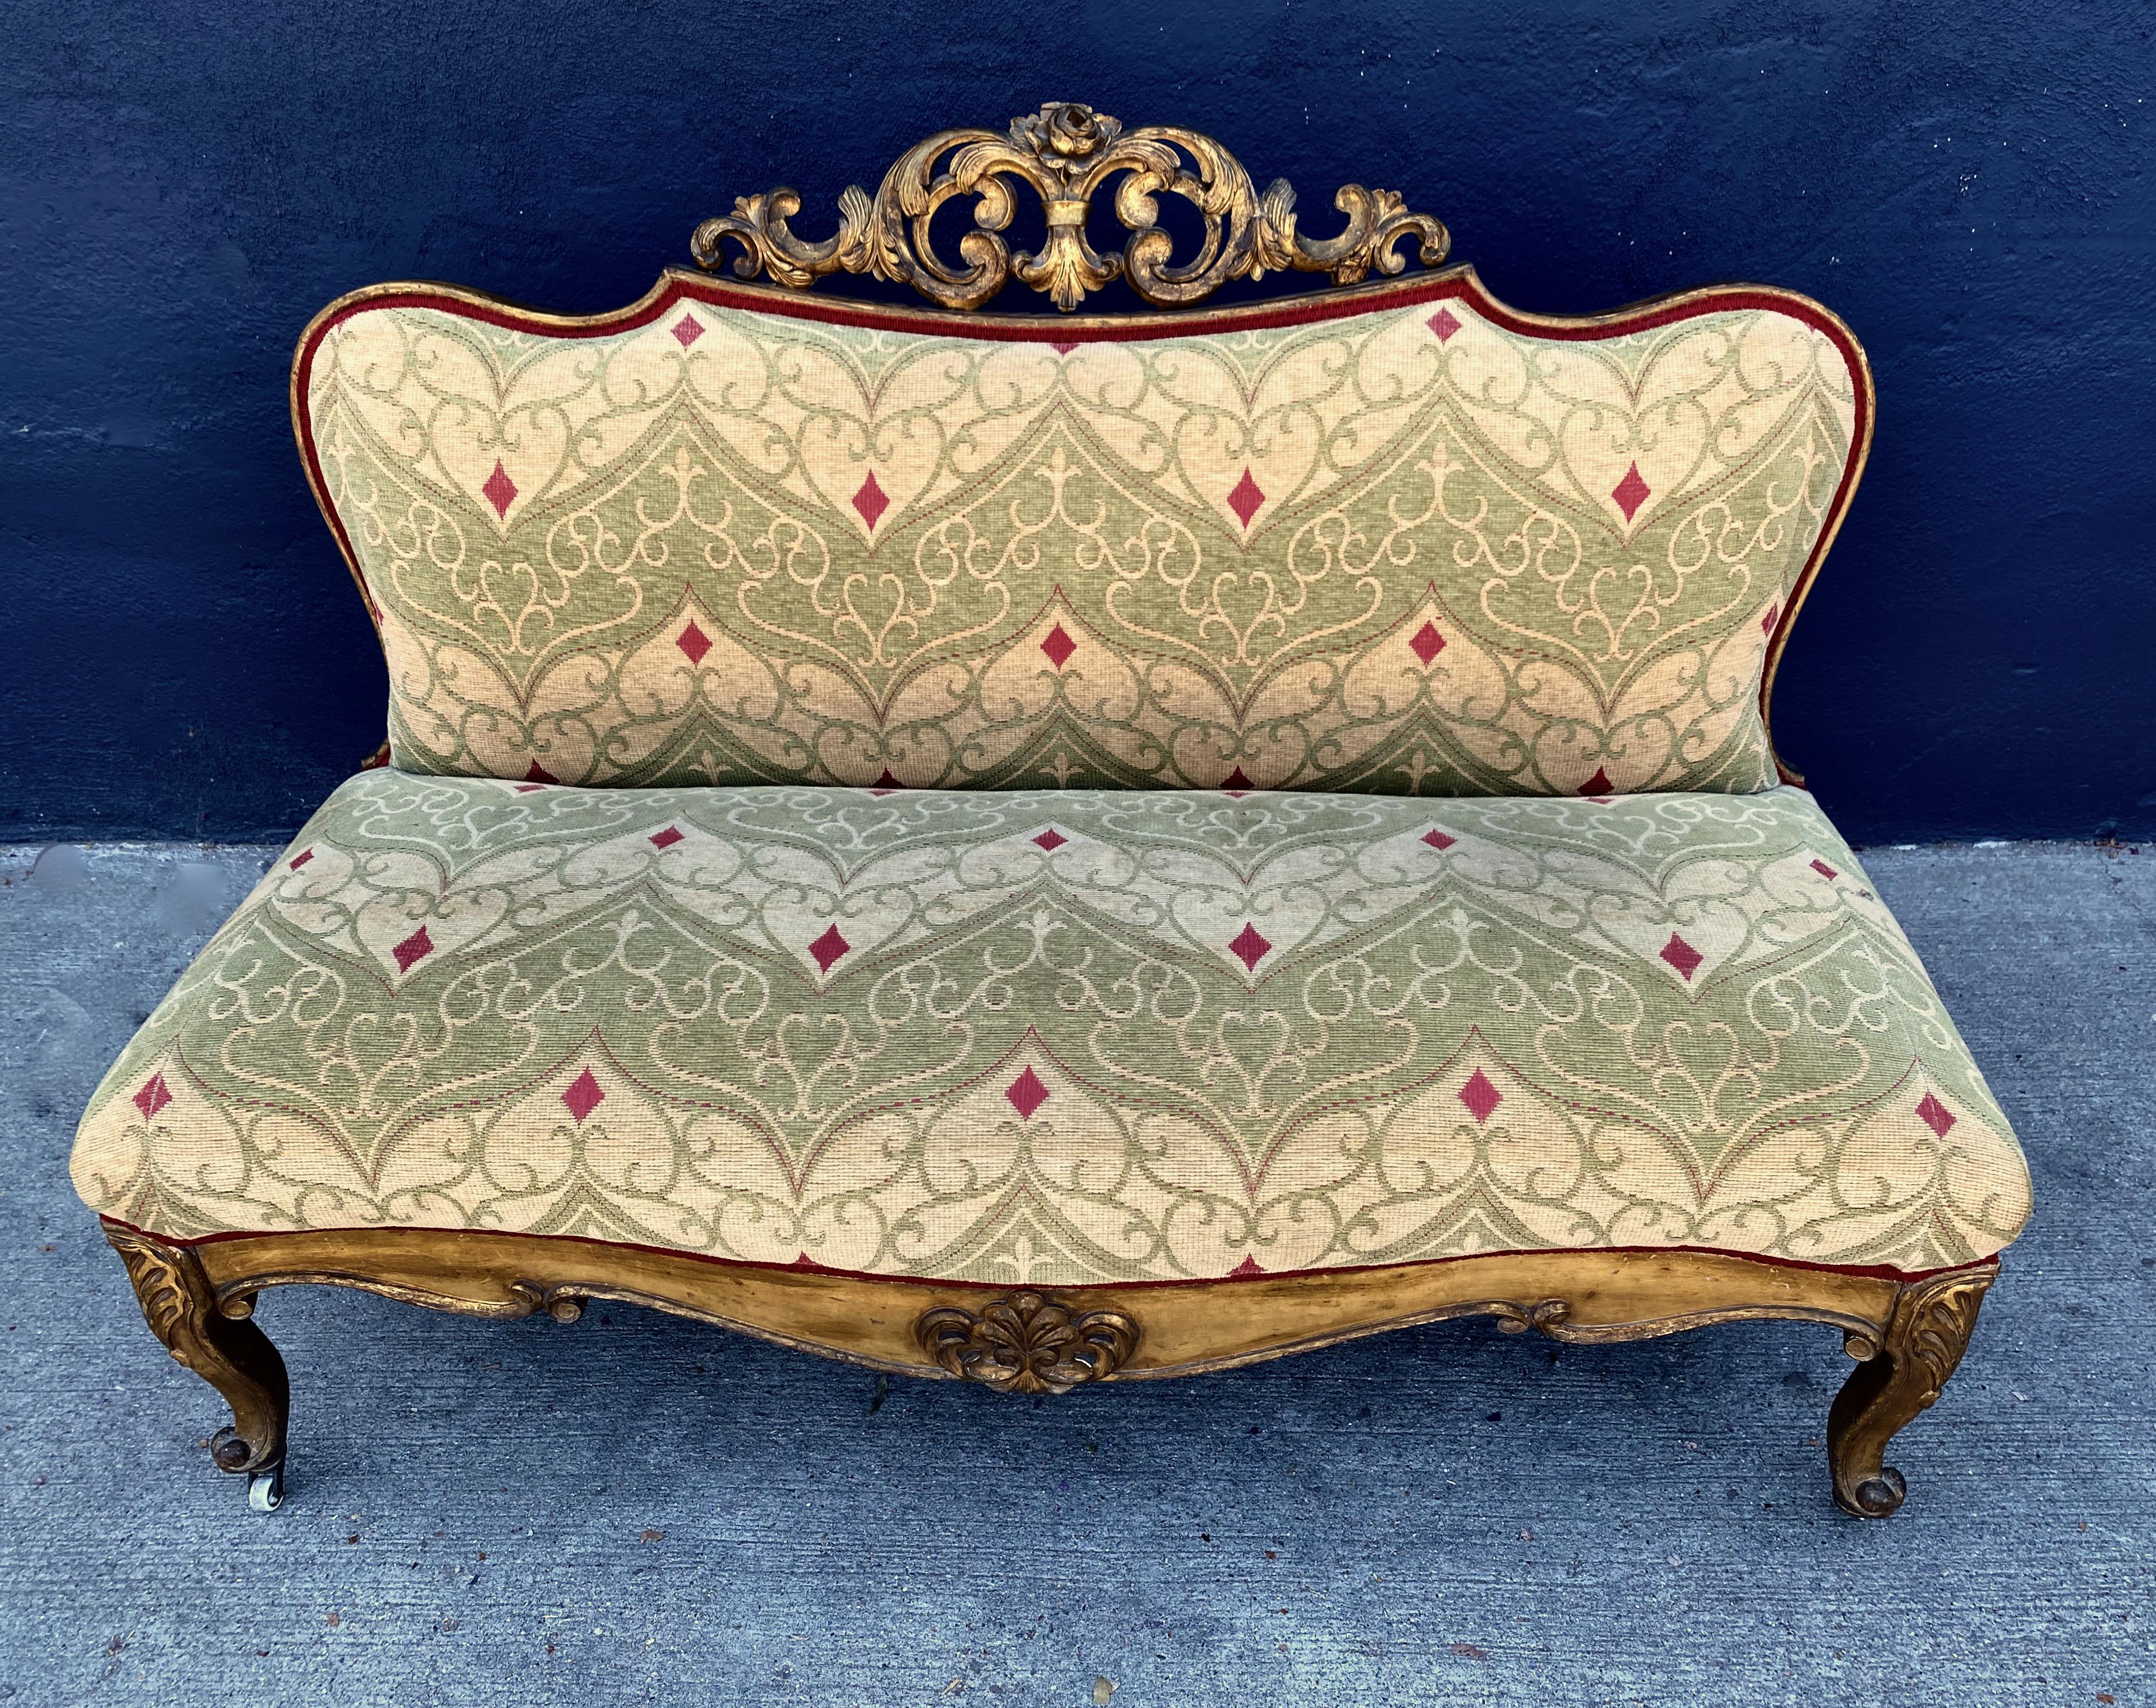 This is a charming mid-19th century carved Italian or Spanish gilt wood settee or bench. The bench features shell carved cabriole legs ending in snail-form feet. The scrolling seat frame is centered by a carved gilt wood medallion. The serpentine